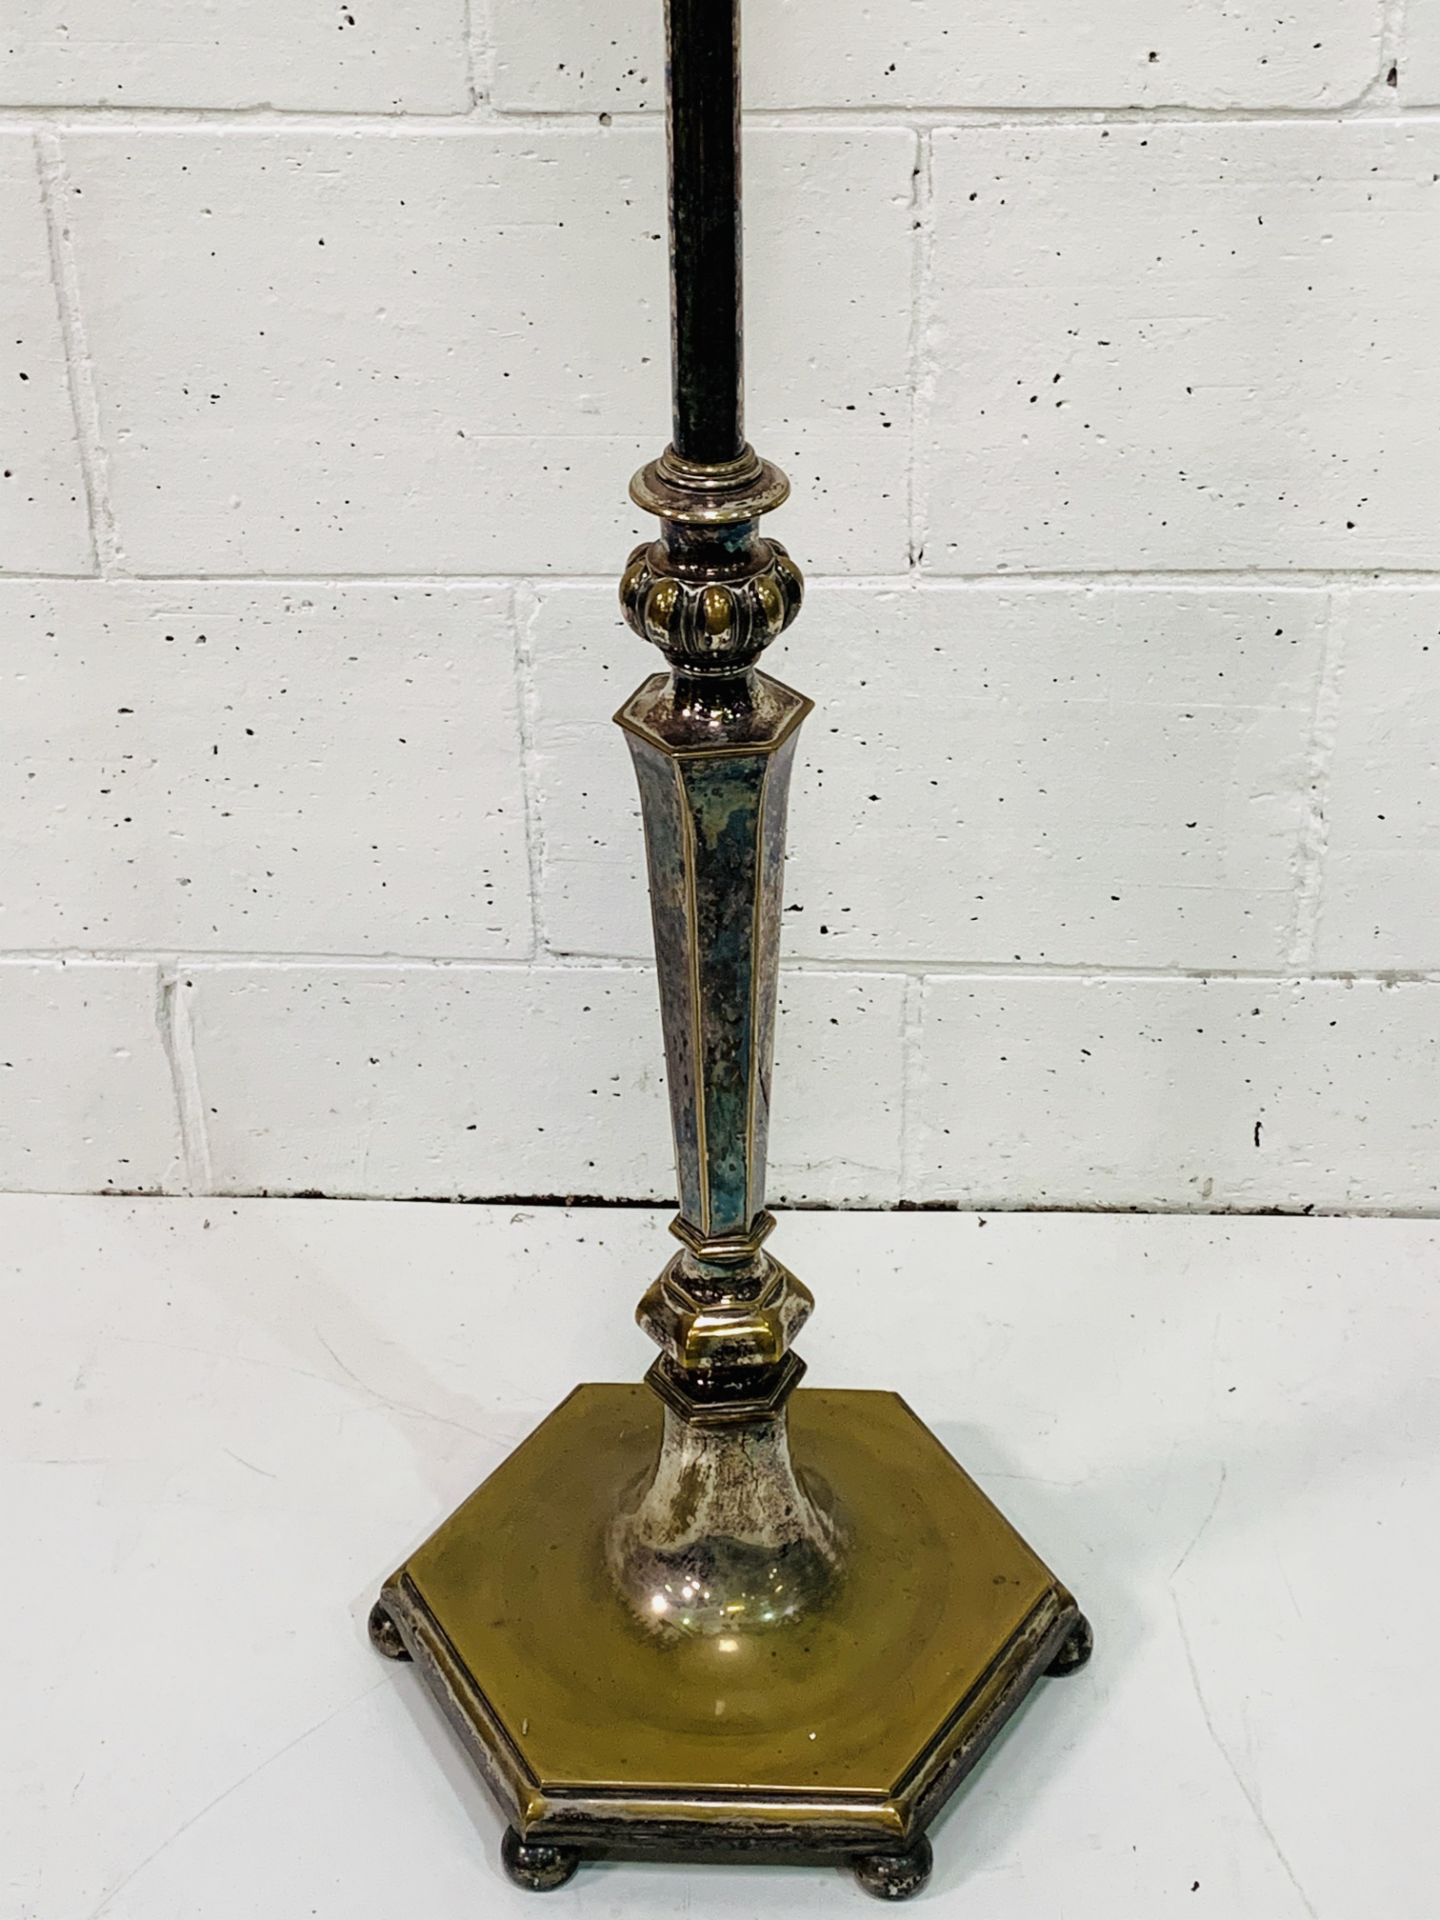 Decorative silver plate on brass floor standing oil lamp, converted to electricity - Image 2 of 5